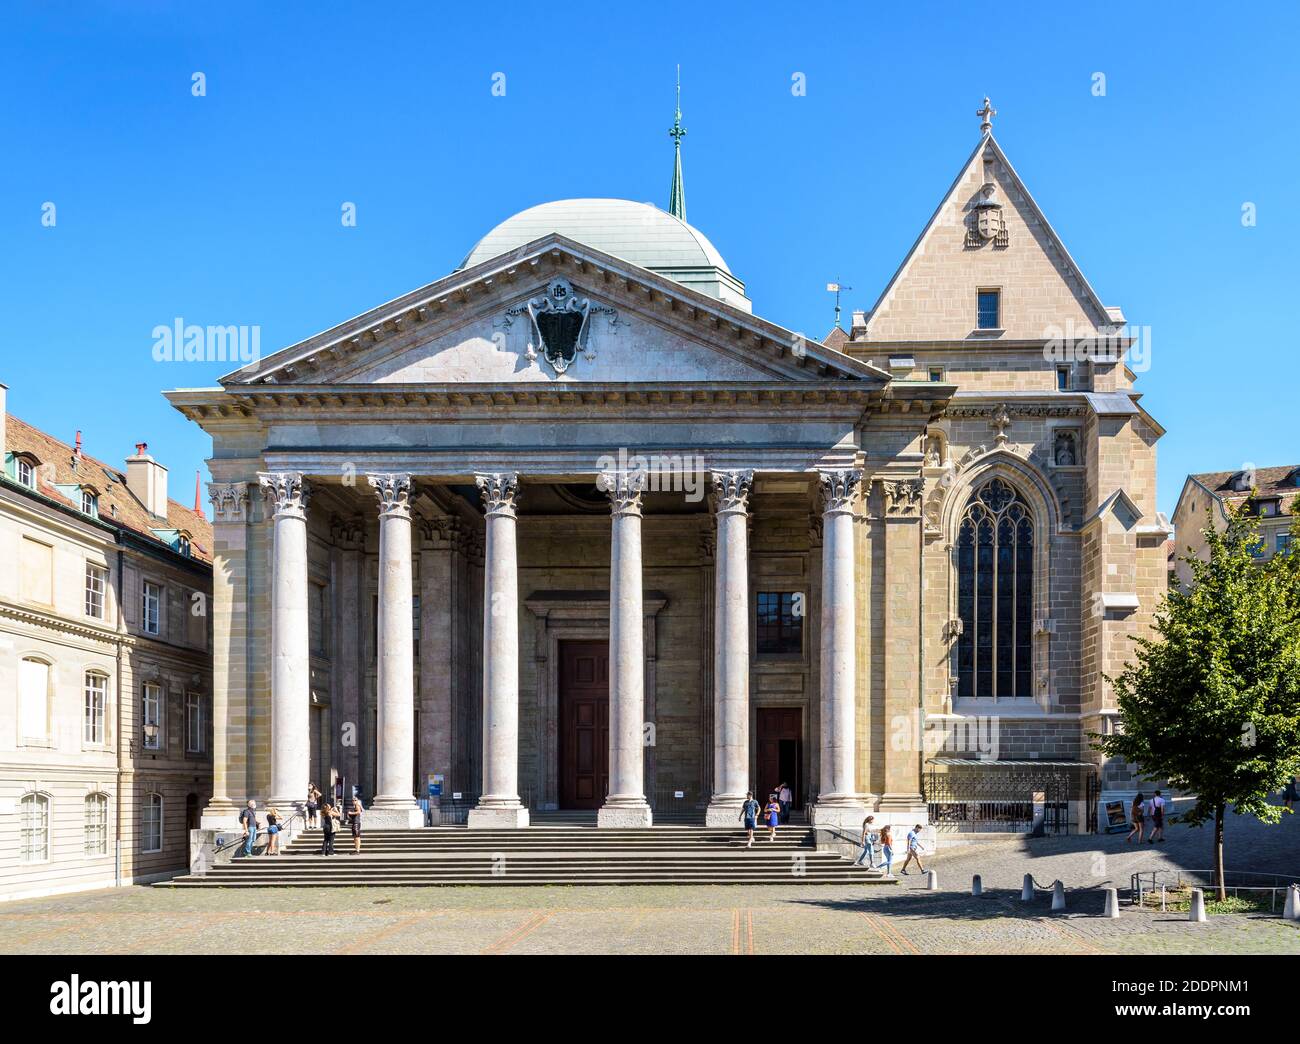 Front view of St. Pierre cathedral in the old town of Geneva, a former Roman catholic cathedral converted to a Protestant church. Stock Photo